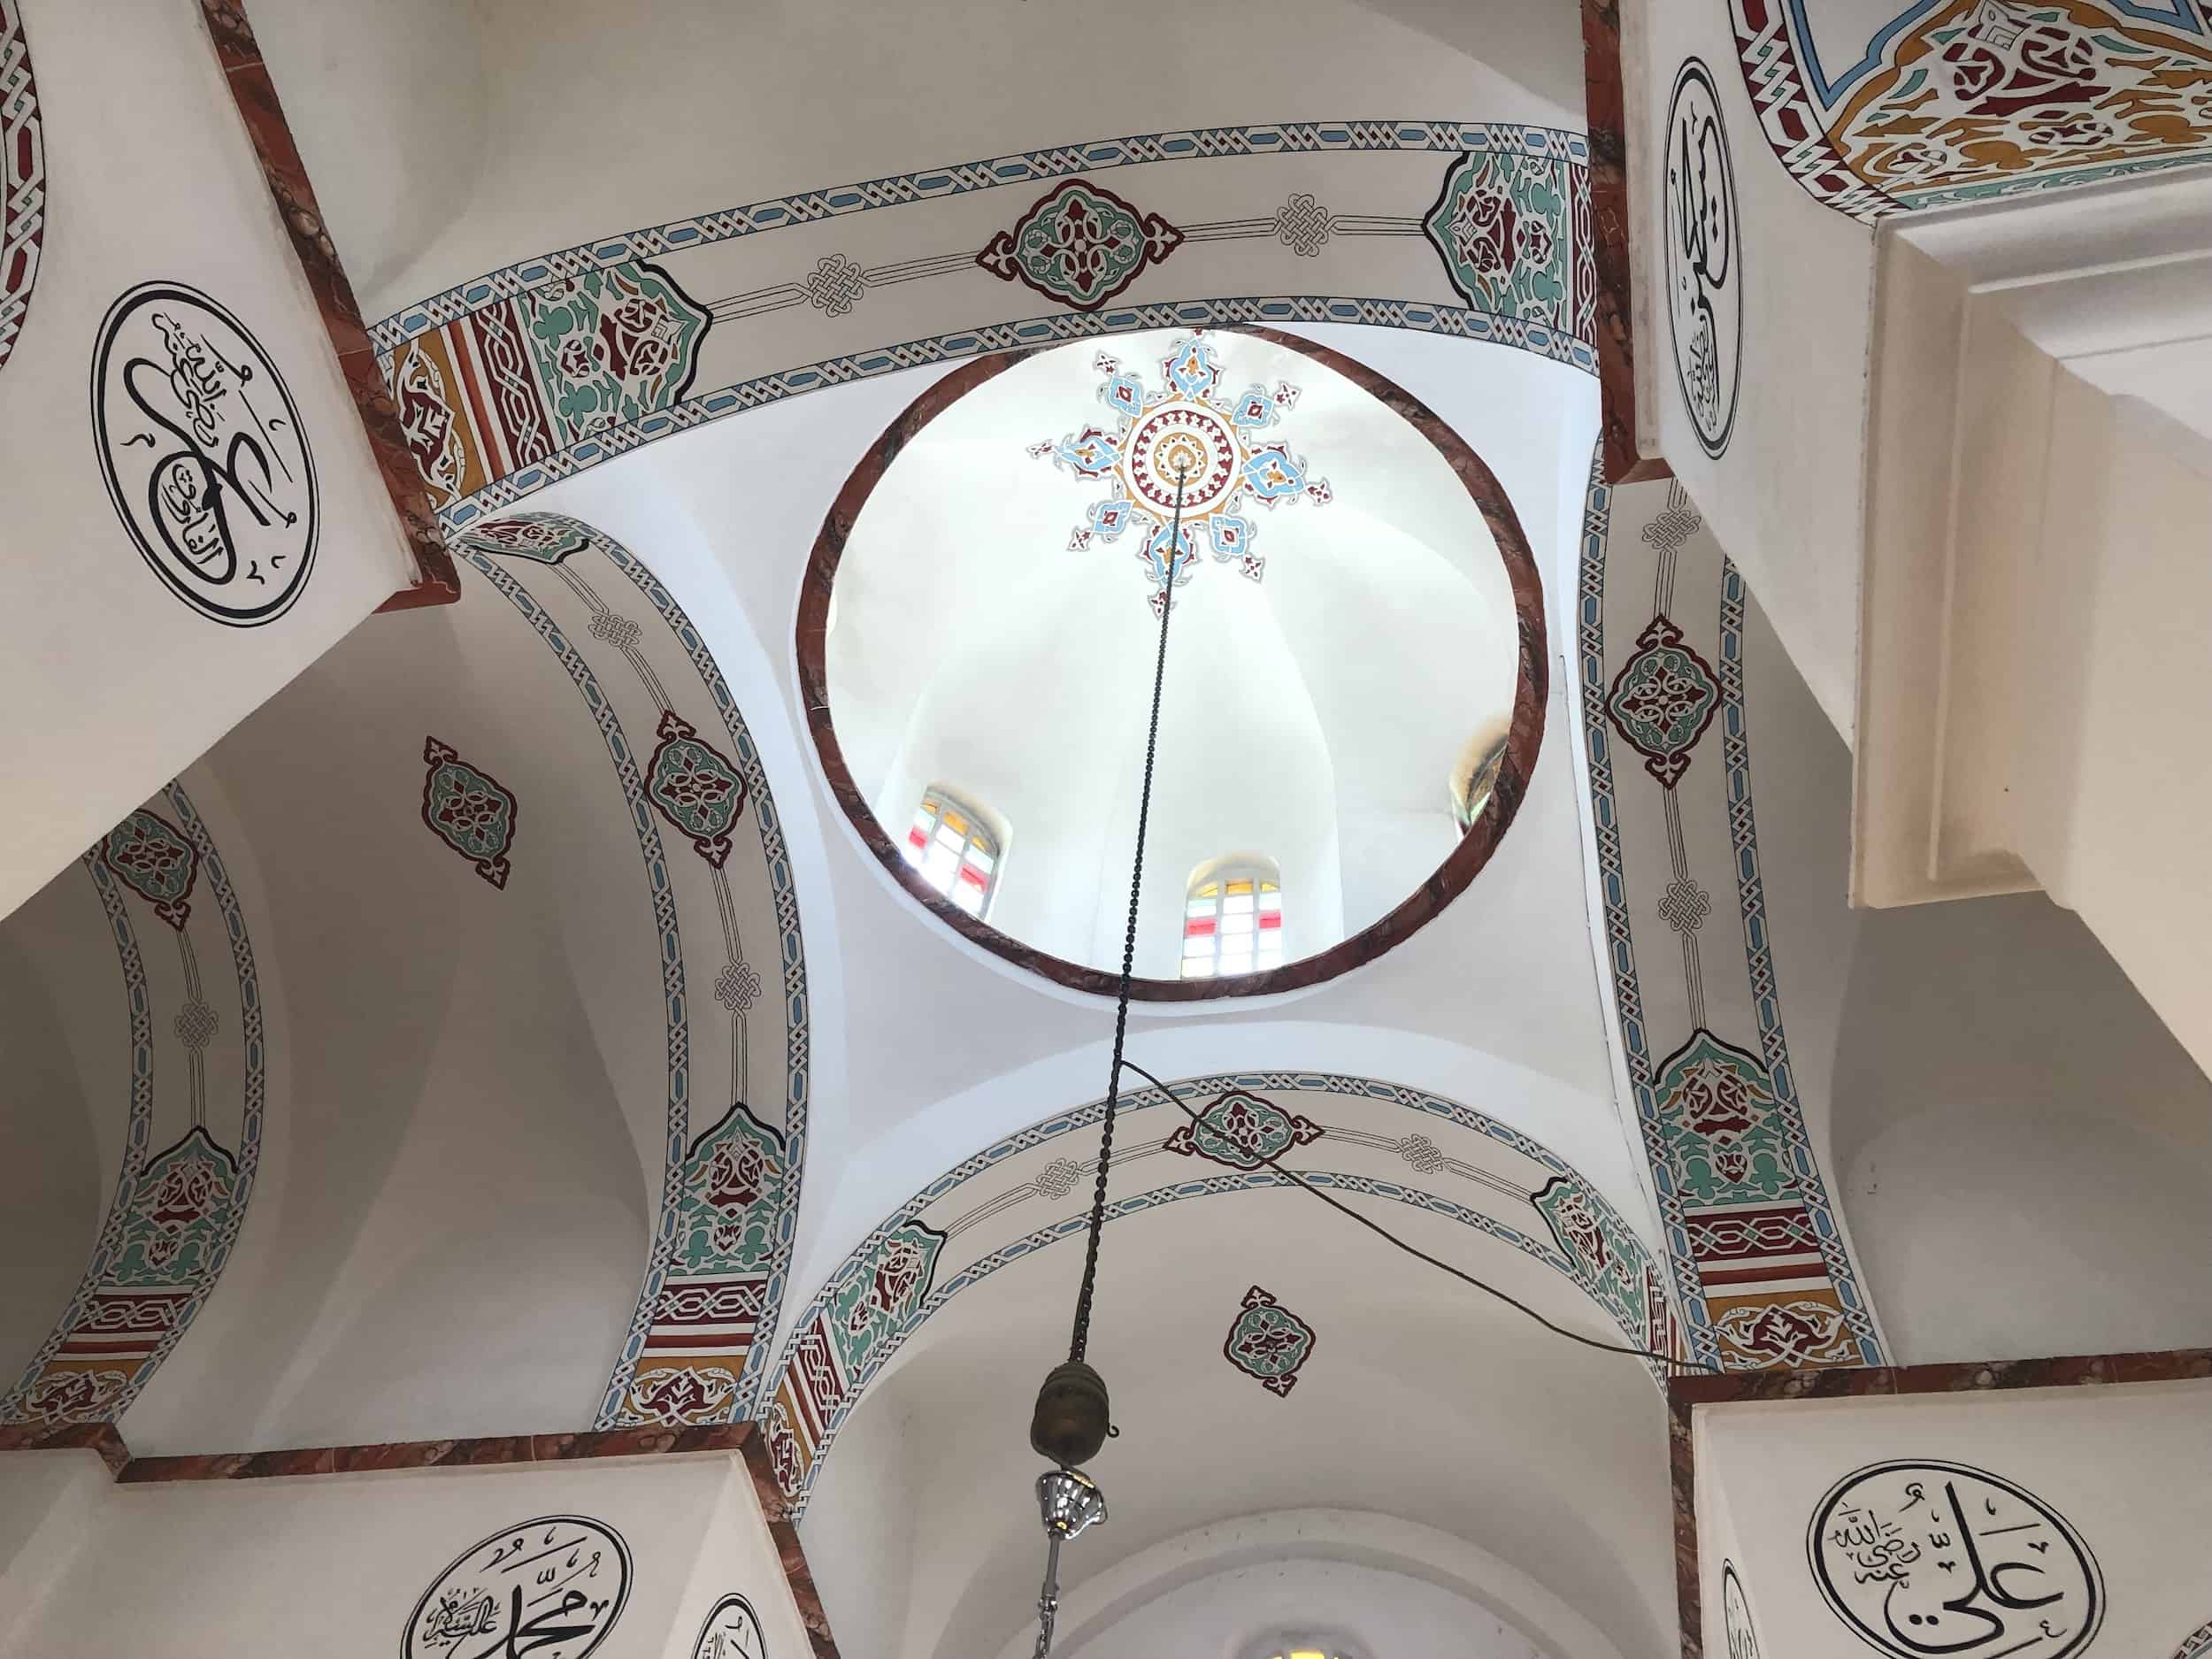 Dome of the Bodrum Mosque in Laleli, Istanbul, Turkey